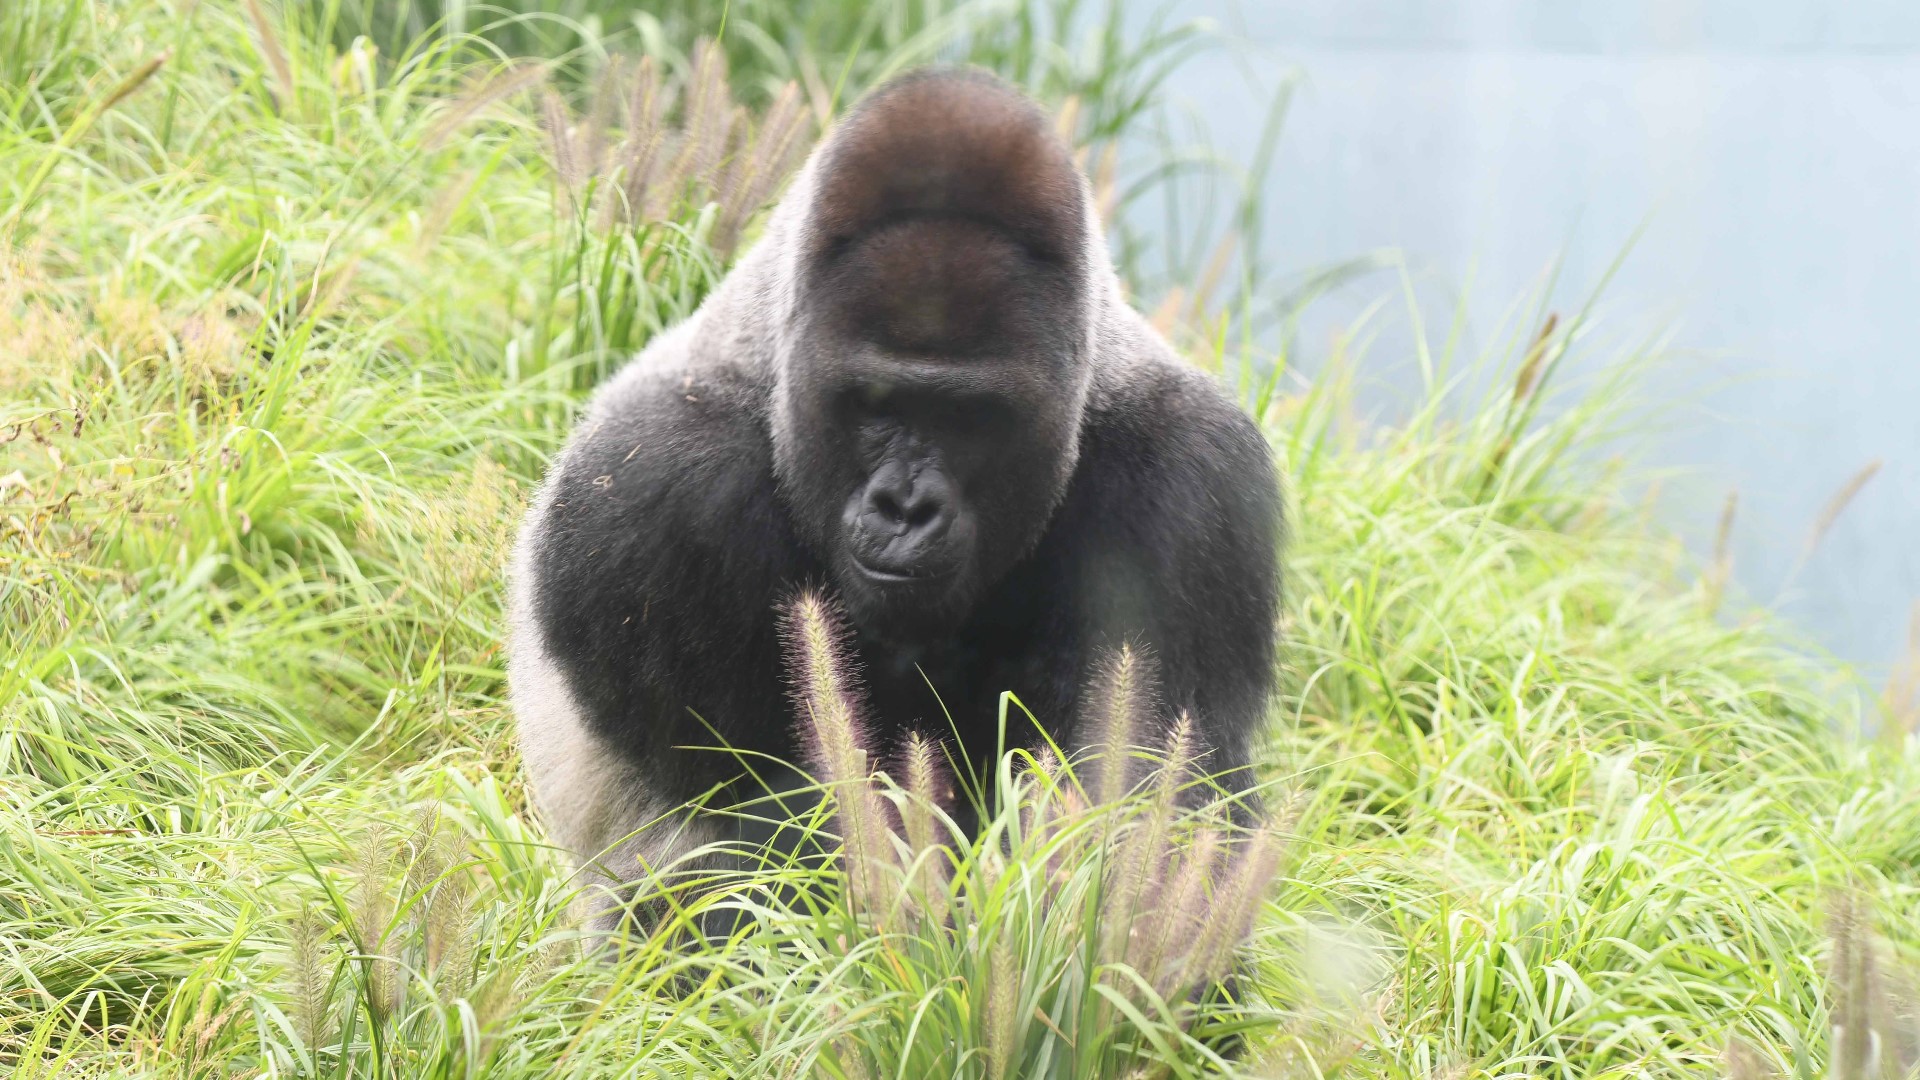 Medical professionals discovered a softball-sized mass in the silverback gorilla's abdomen.